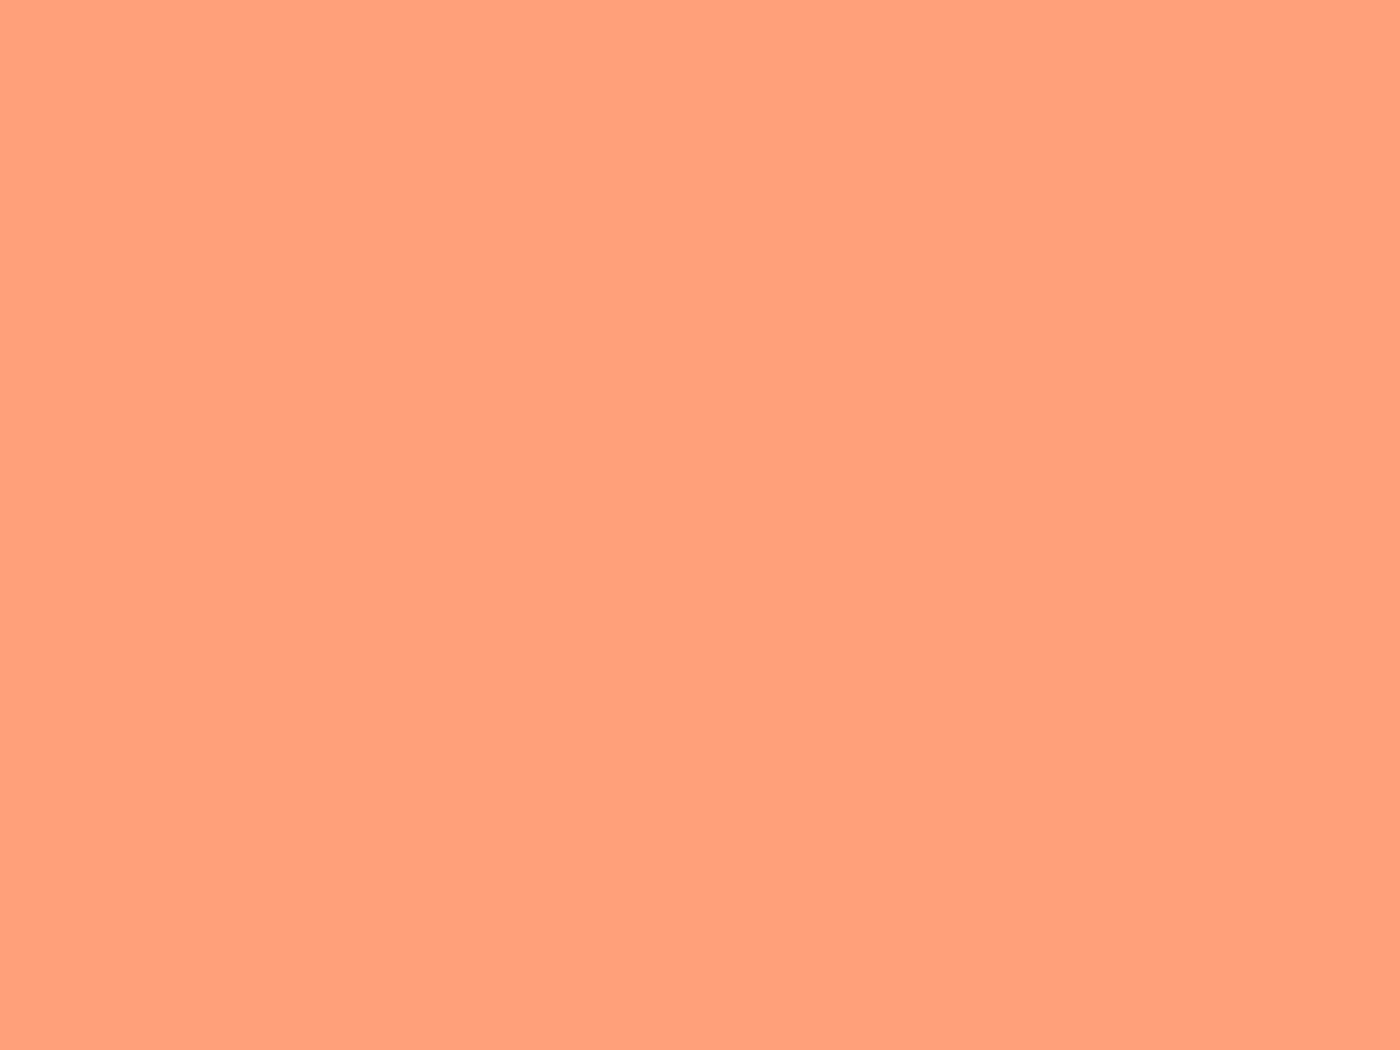 1400x1050 Light Salmon Solid Color Background